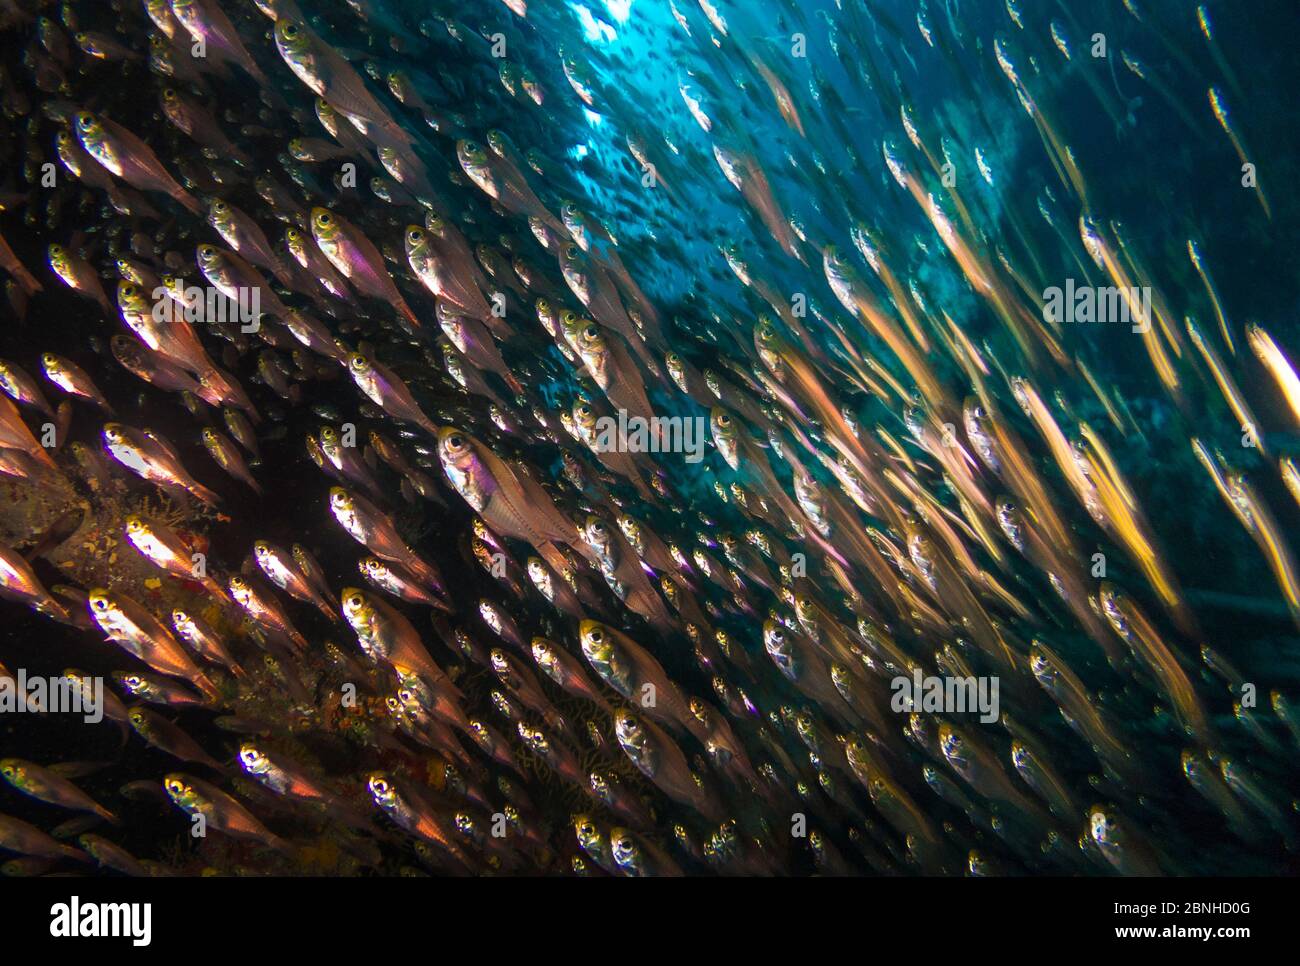 School of Glassfish (Parapriacanthus guentheri) in the cargo hold of the SS Ulysses, Gubal Island, northern Red Sea. Stock Photo